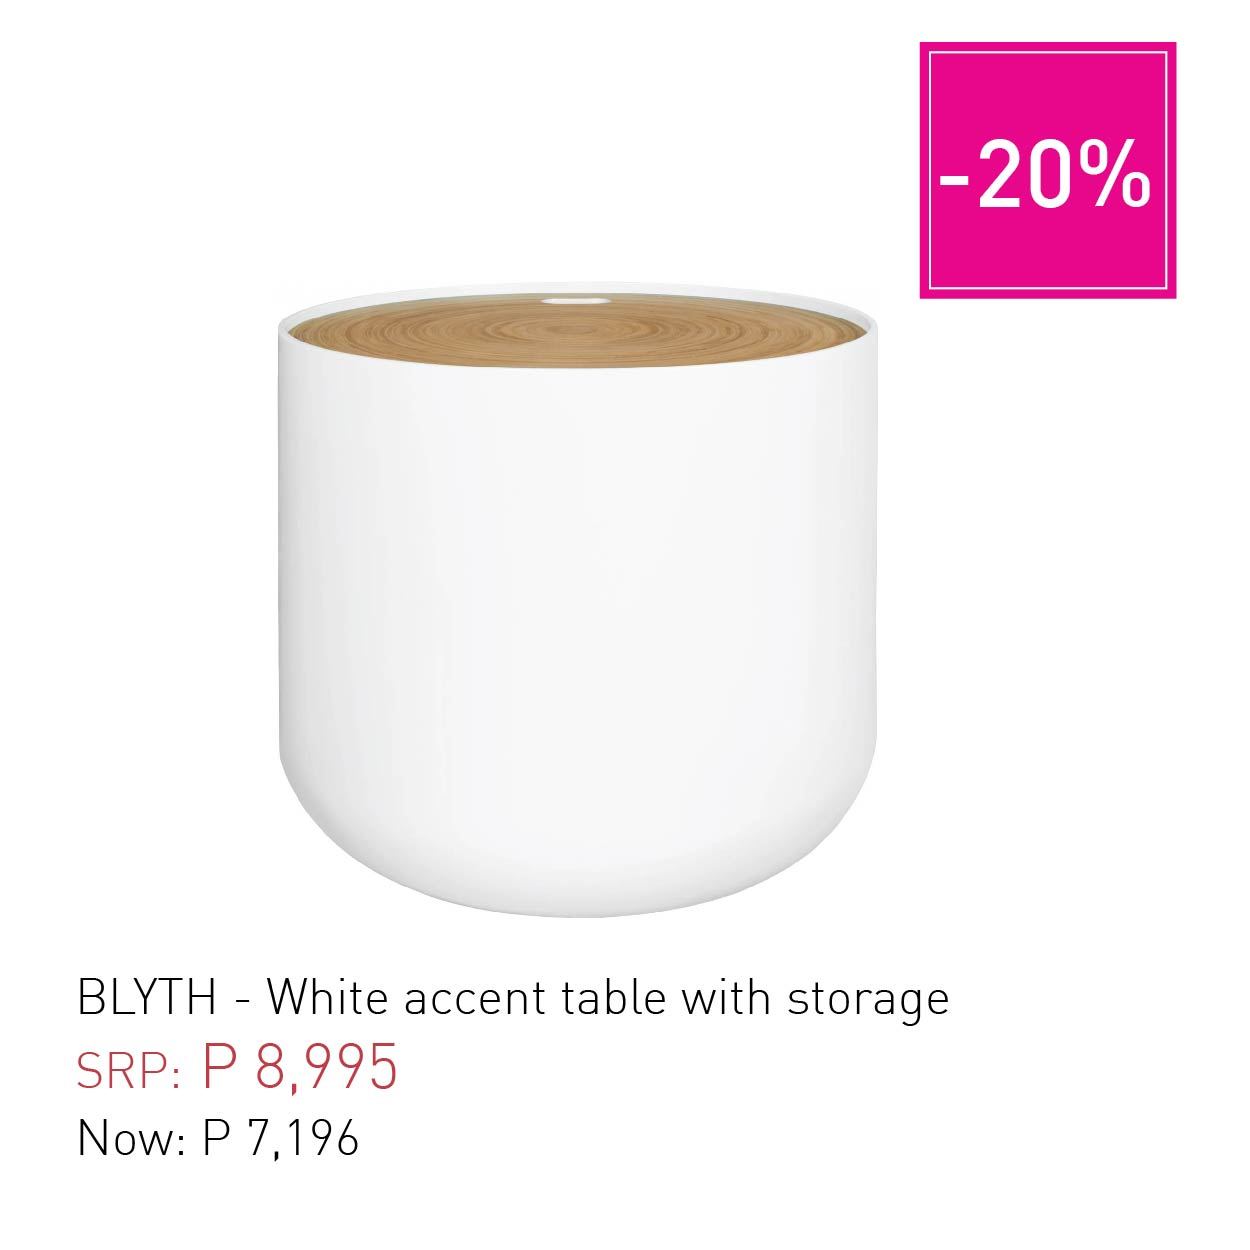 blyth white accent table with storage habitat manila childrens lamps ikea bedroom side tables target room essentials cordless lights small entryway console round lucite concrete